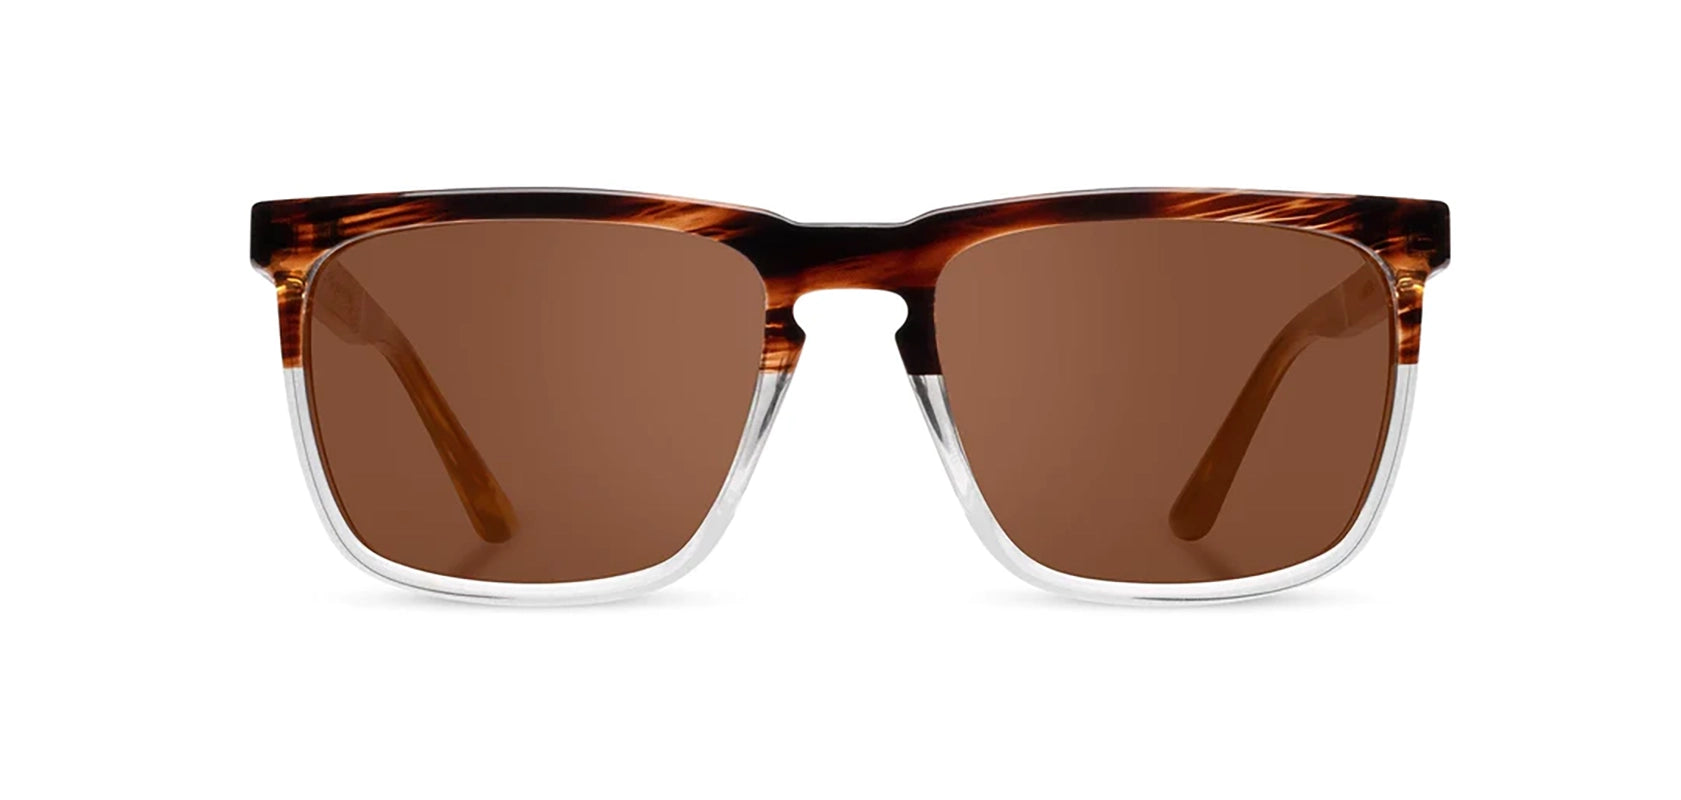 Camp Ridge sunglasses with Whiskey Soda / Walnut Frames, with Brown Polarized lenses, Front View